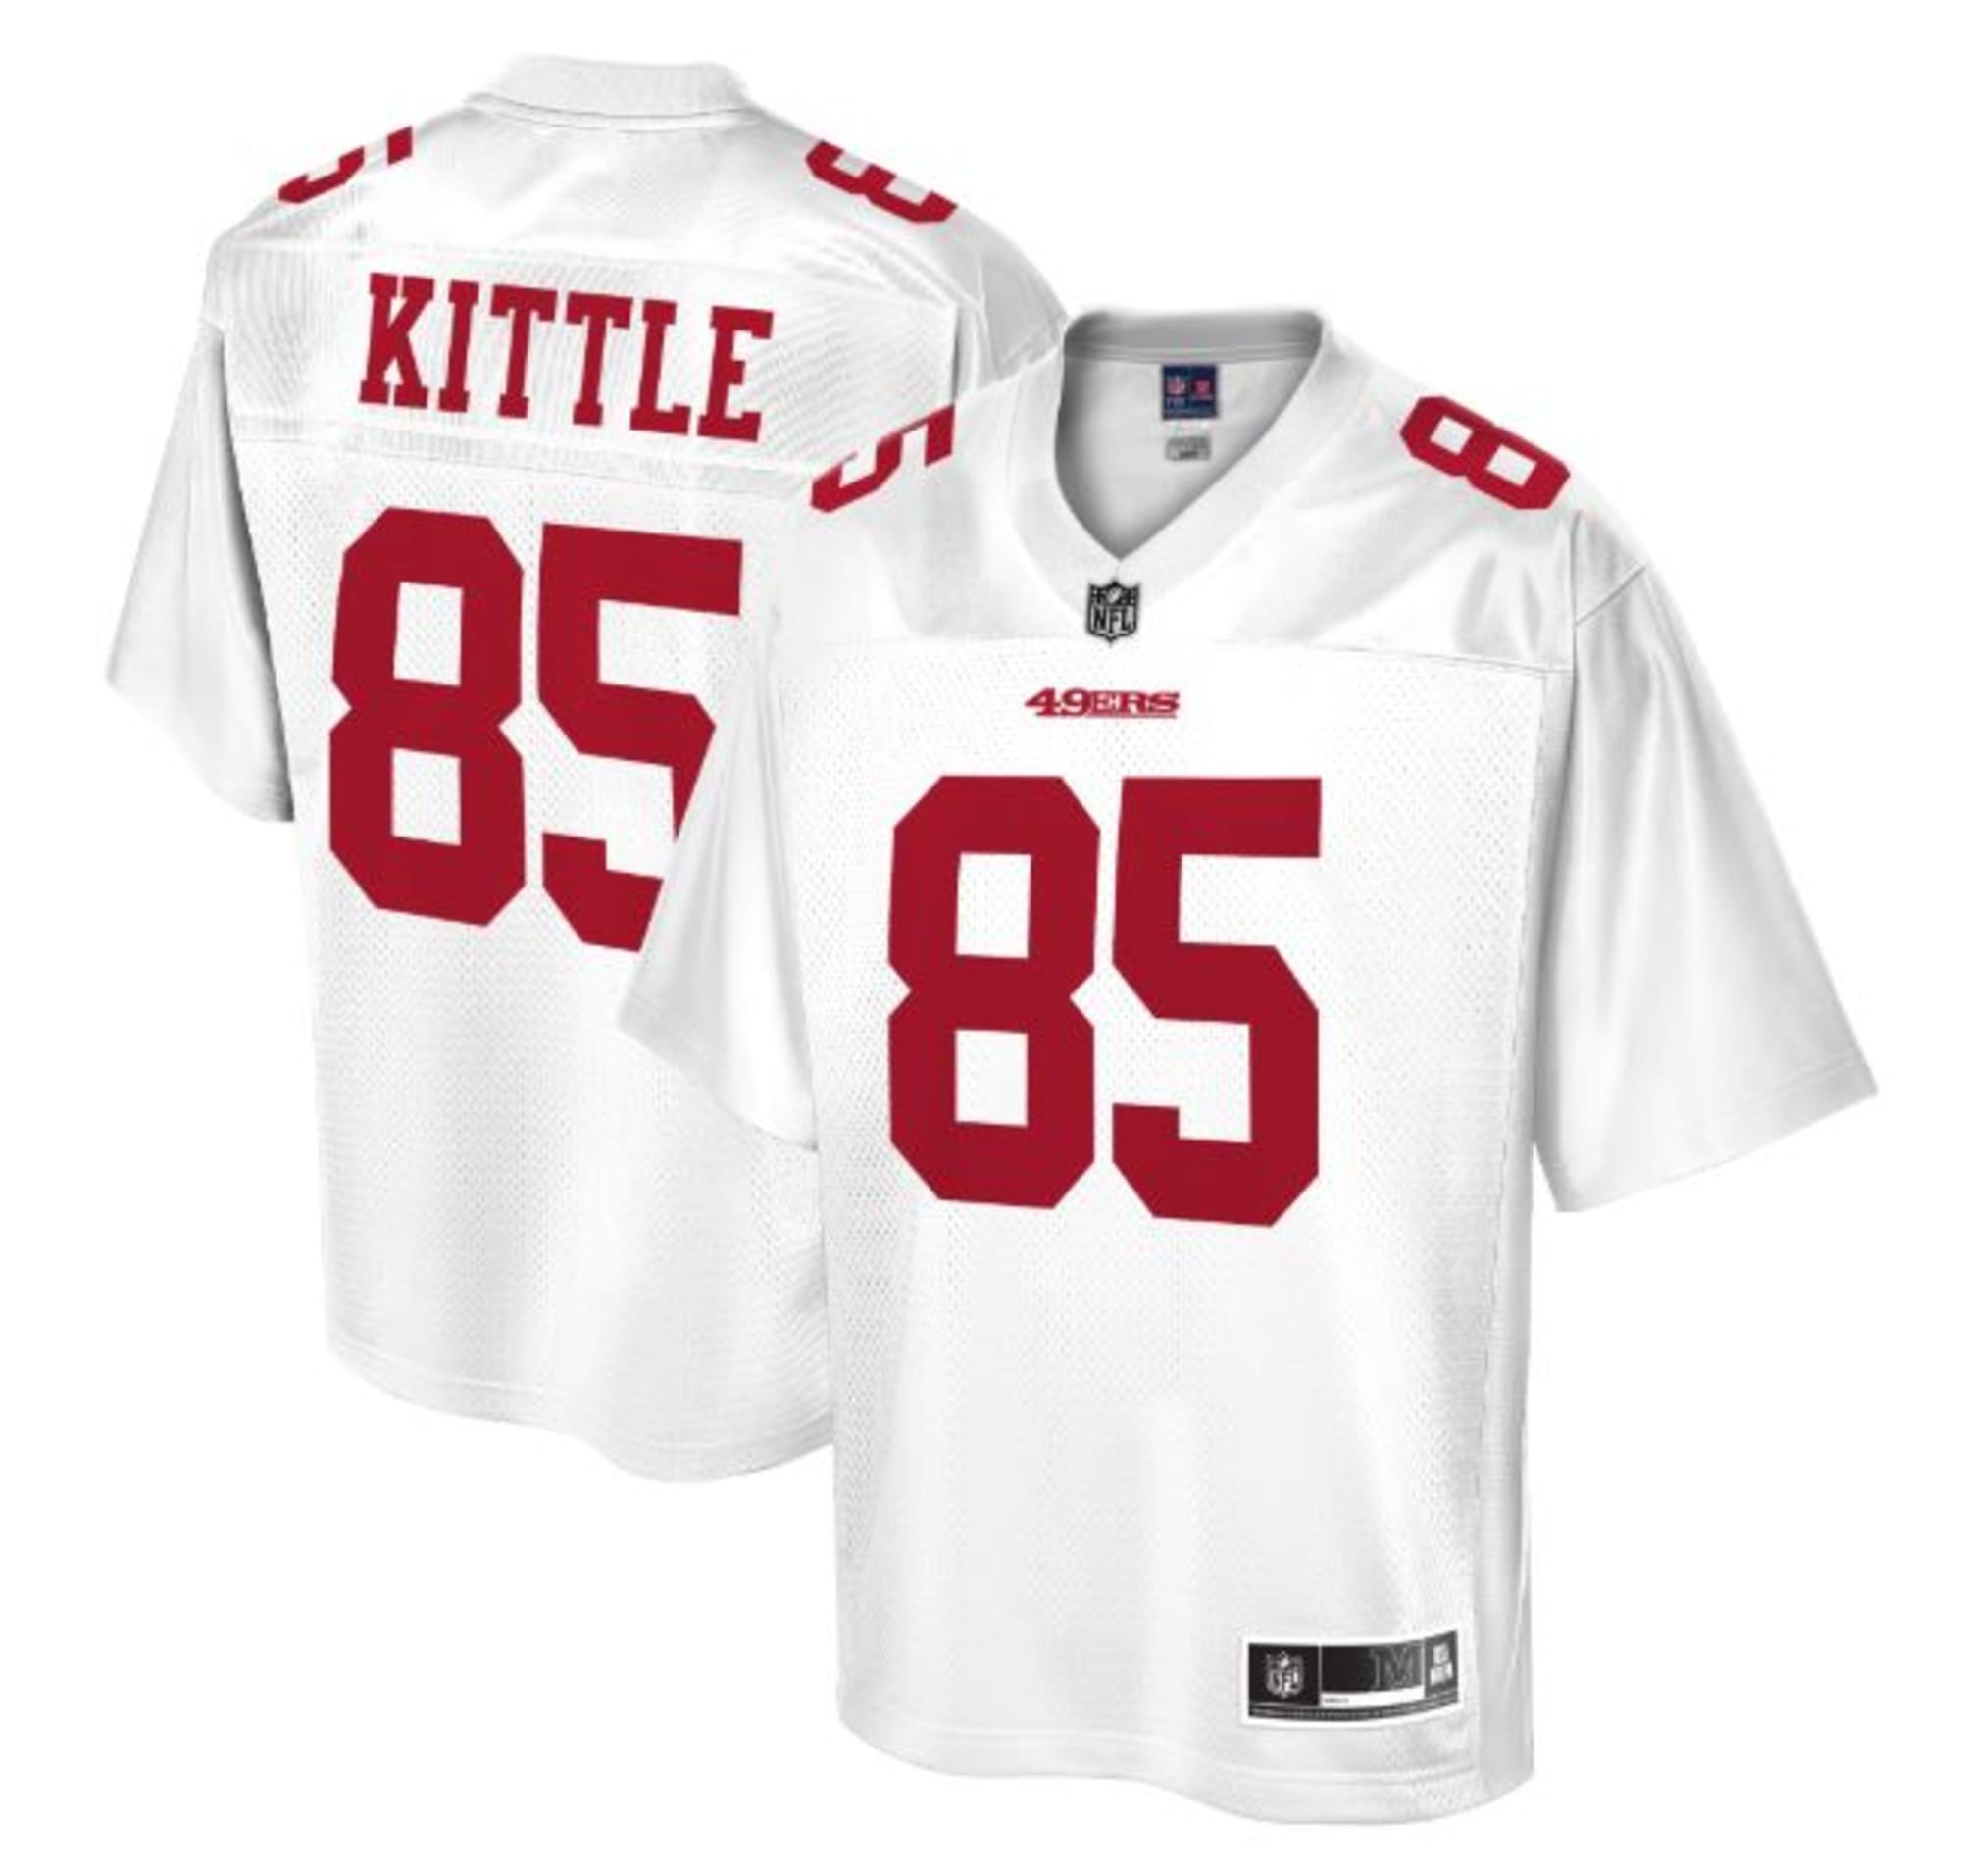 49ers shirts for sale